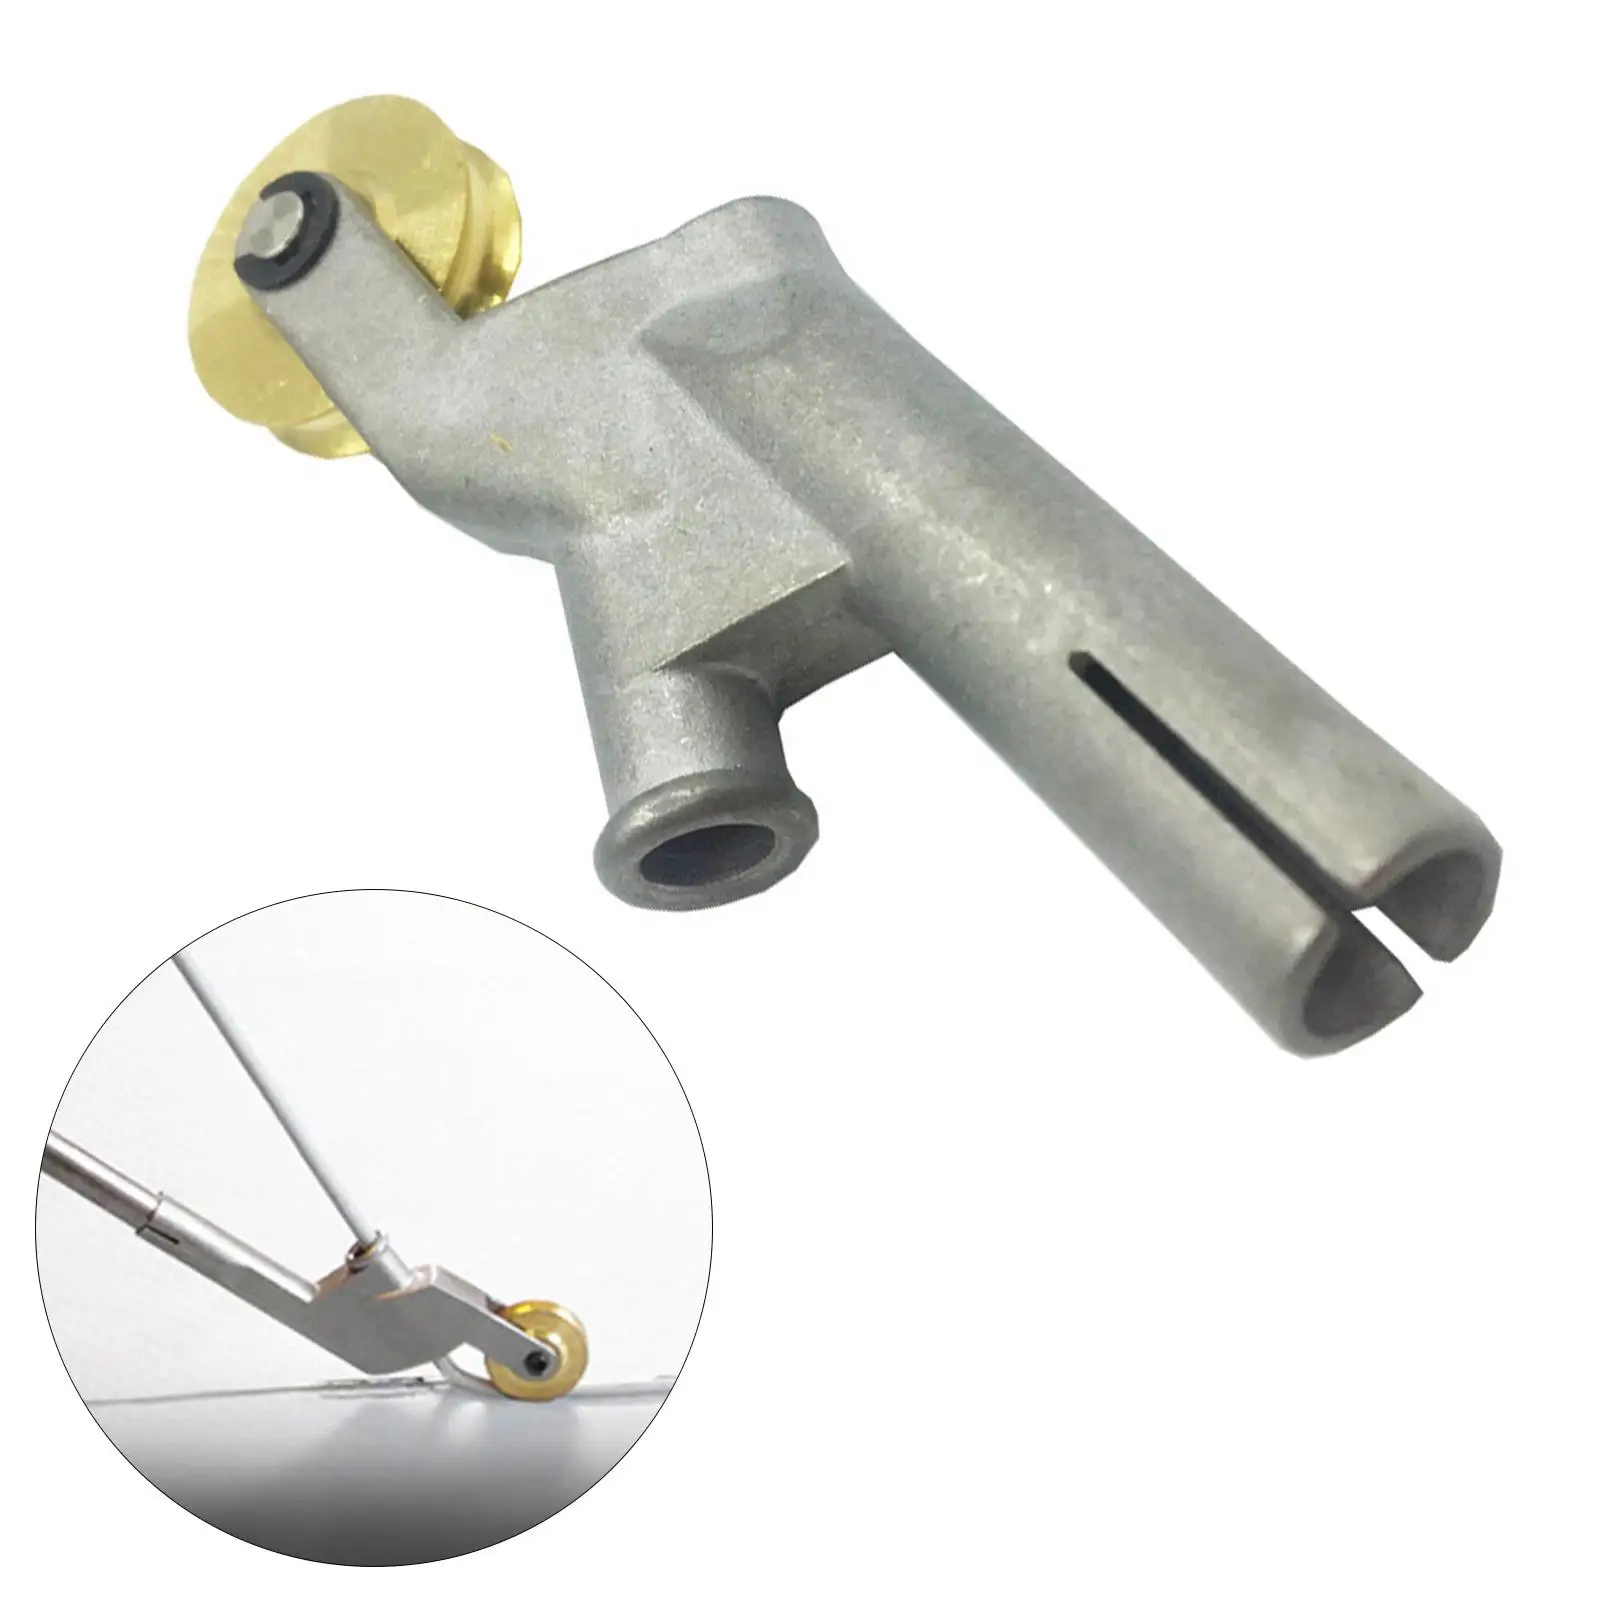 Speed Welding Nozzle with Wheel for High Strength Attachment for PVC Plastic 3mm/4mm/5mm Welding Rods Replacement Hot Air Gun